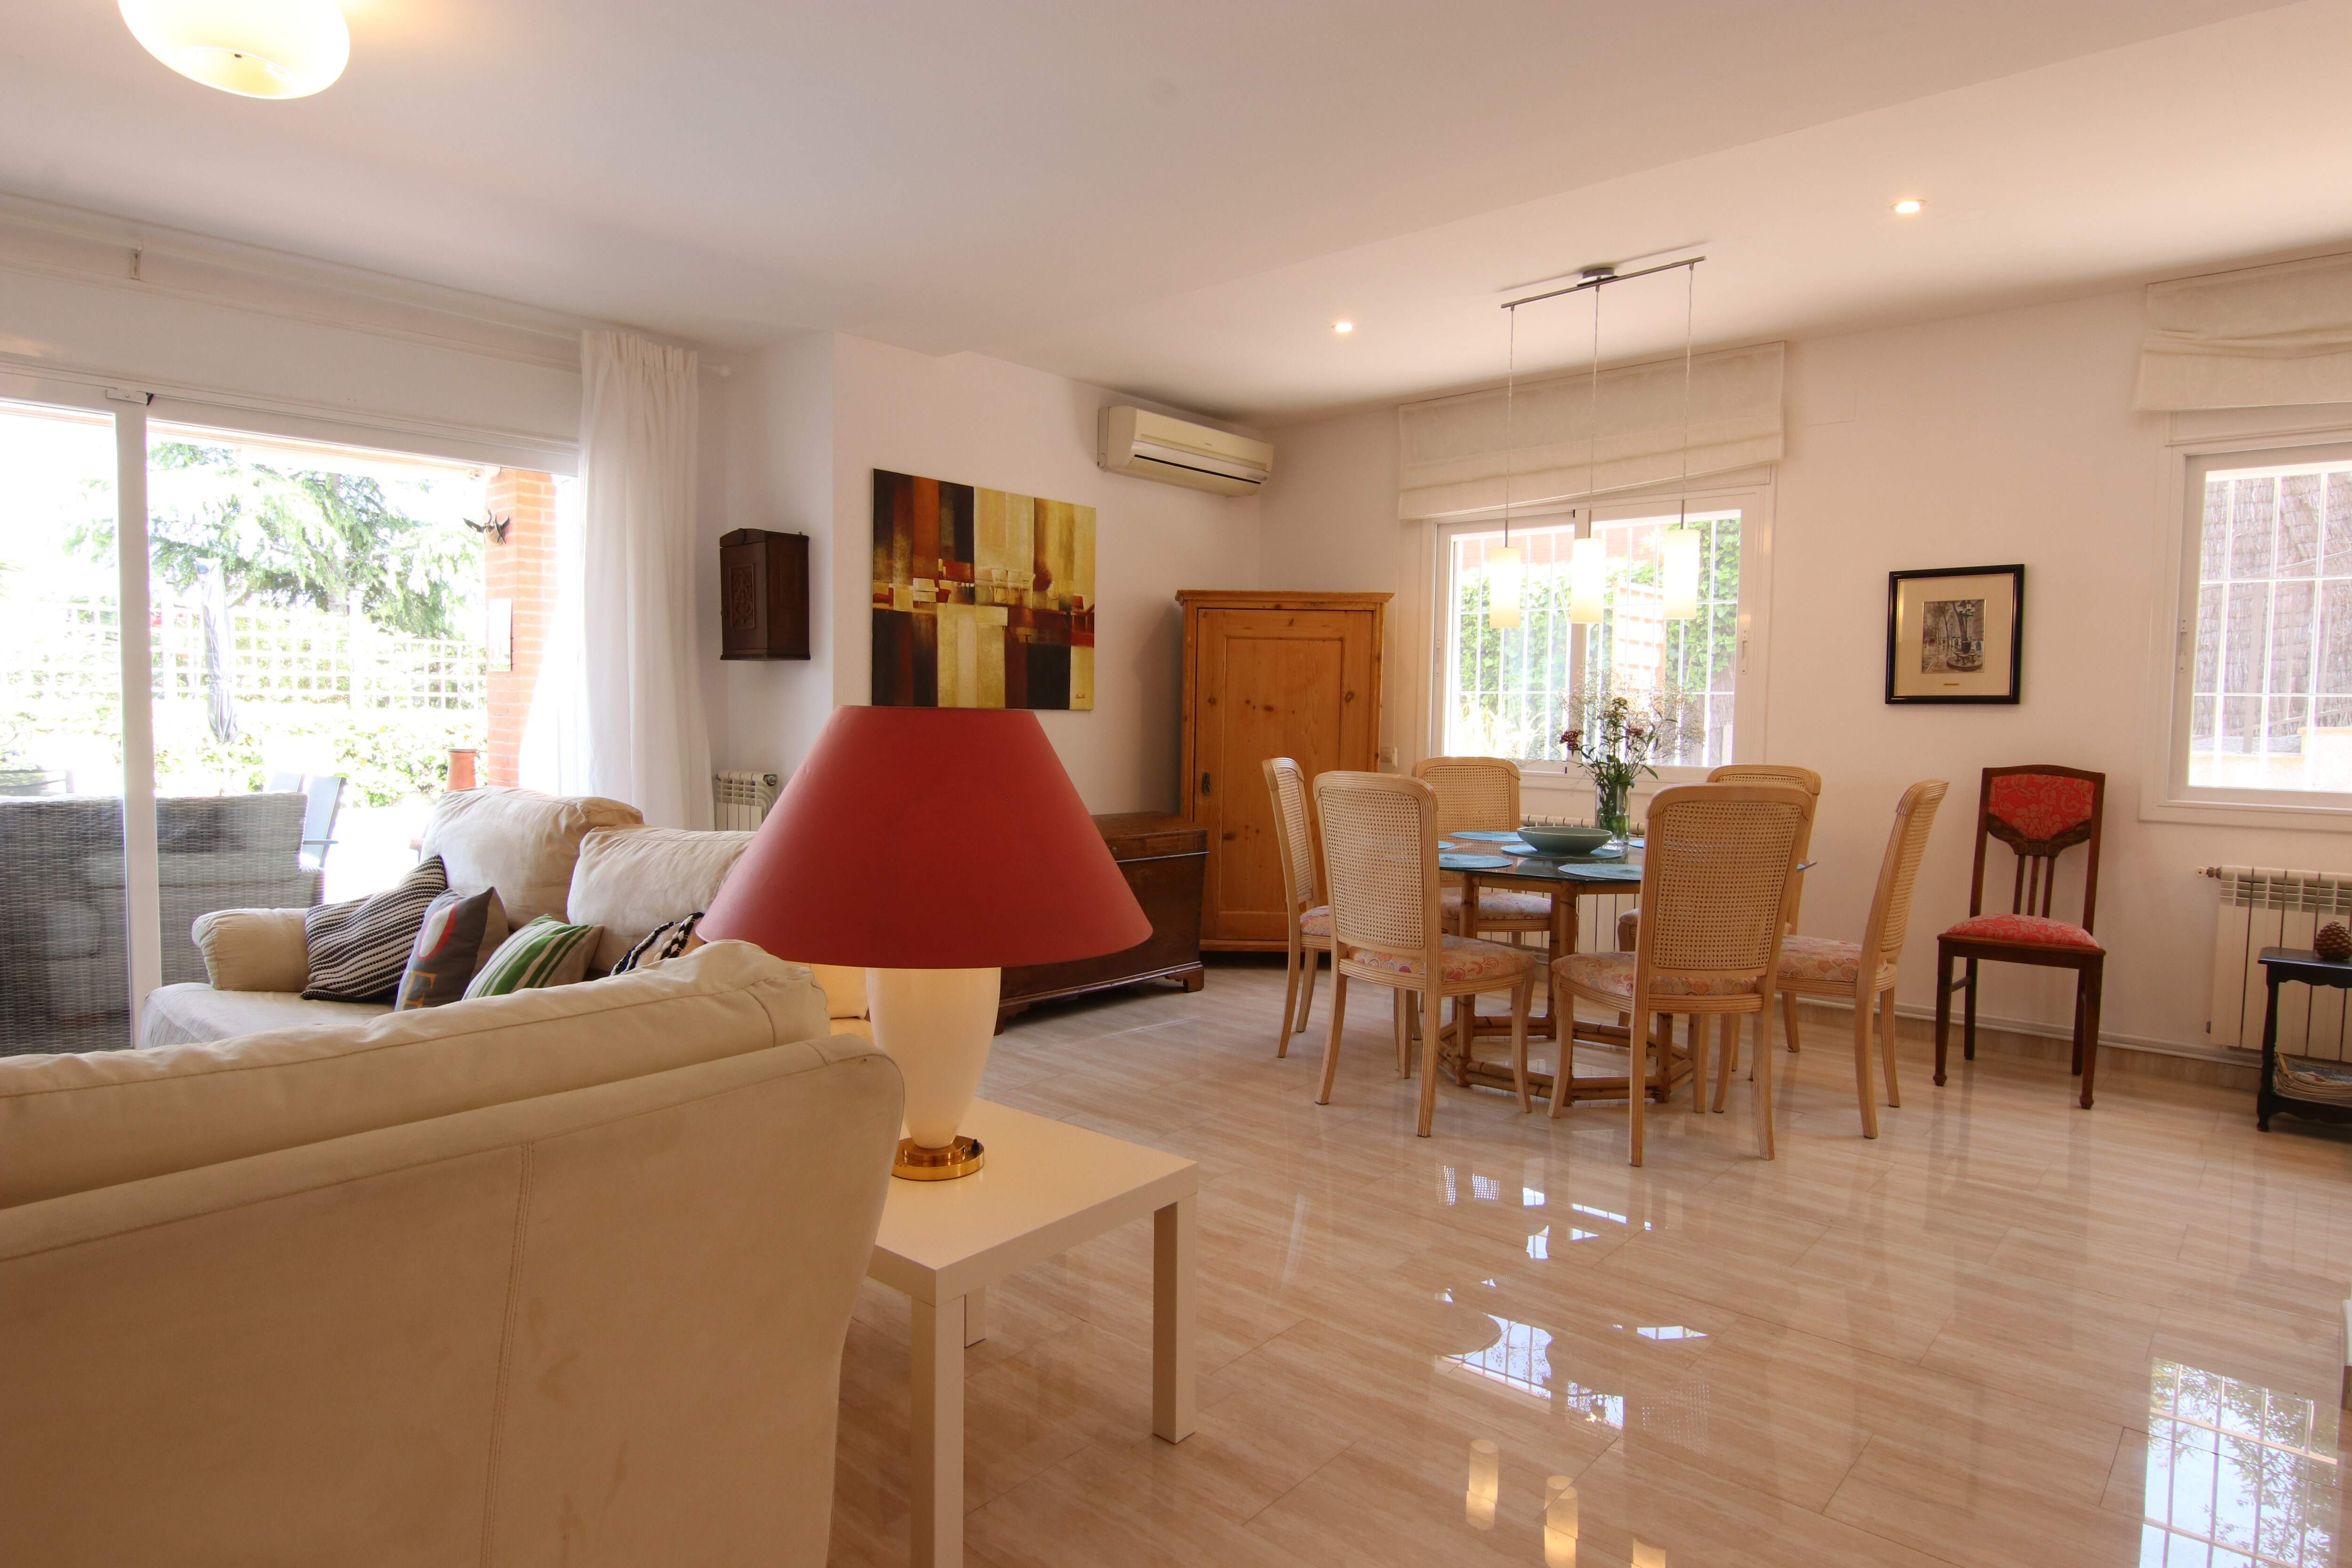 Property Image 2 - Amazing Villa in Arenys de Mar with swimming pool